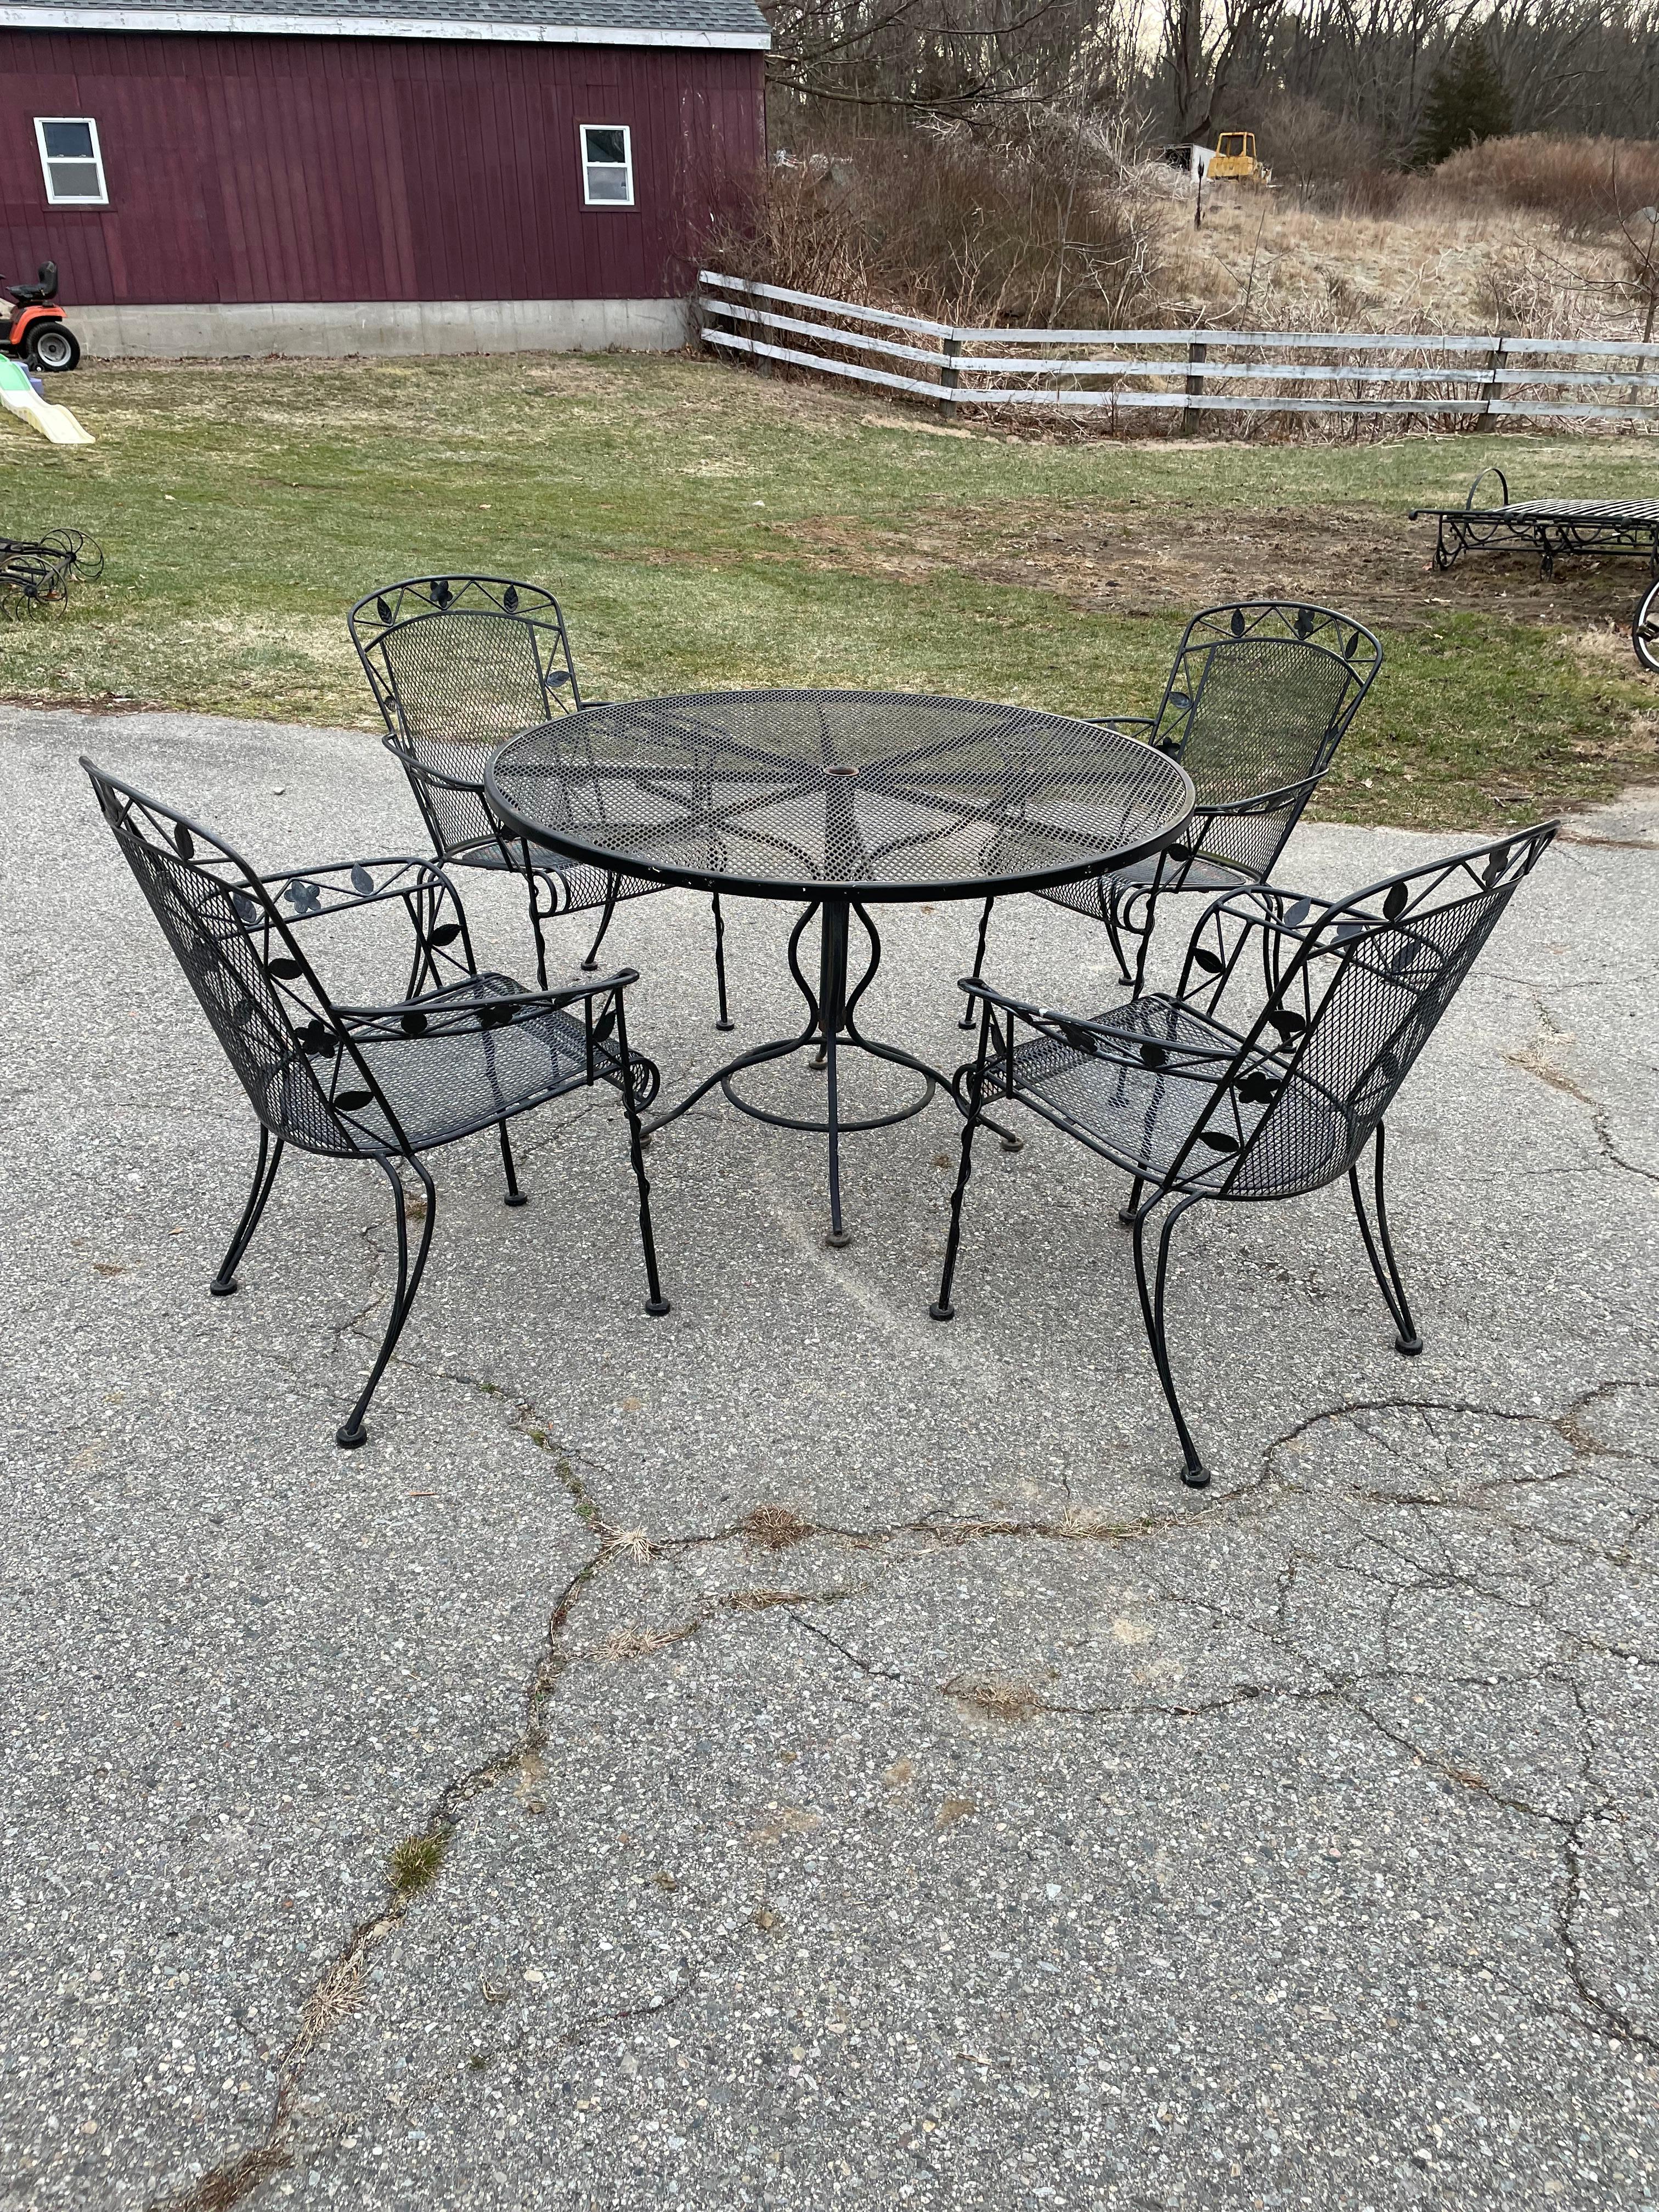 Woodard Wrought Iron Dining Set

5 Piece Outdoor Dining Set perfect for any deck, garden, or patio. Mesh top table with attractive base with maker’s mark and 4 high back Arm Chairs with floral motif. 48” Round Table.

Ships for flat rate of 379